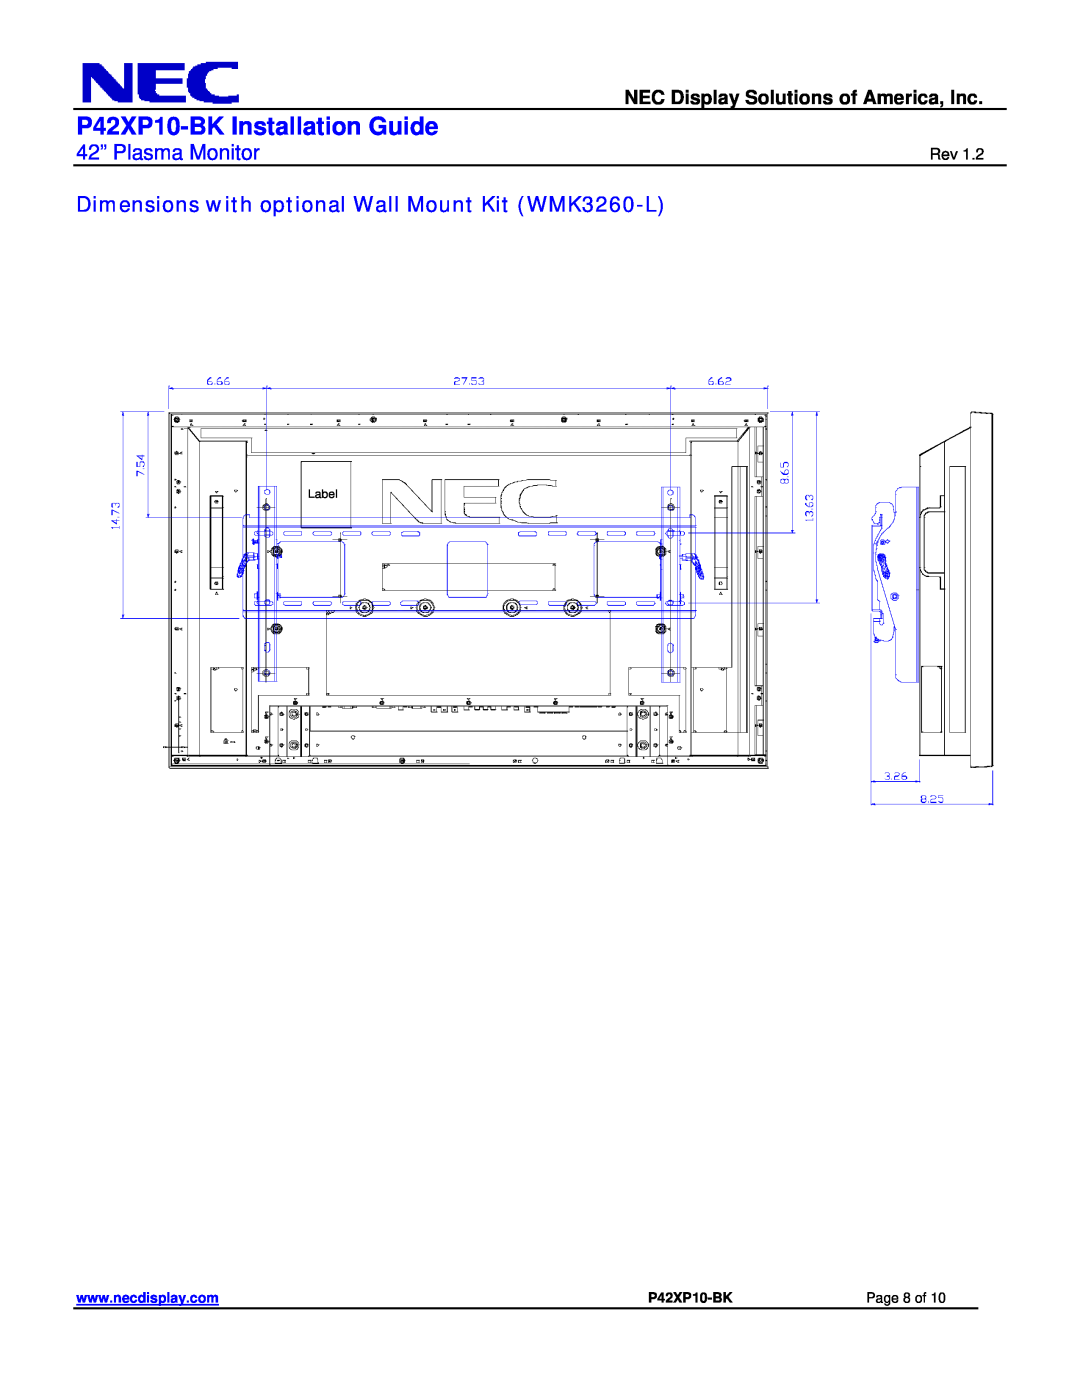 NEC Dimensions with optional Wall Mount Kit WMK3260-L, P42XP10-BK Installation Guide, 42” Plasma Monitor, Page 8 of 